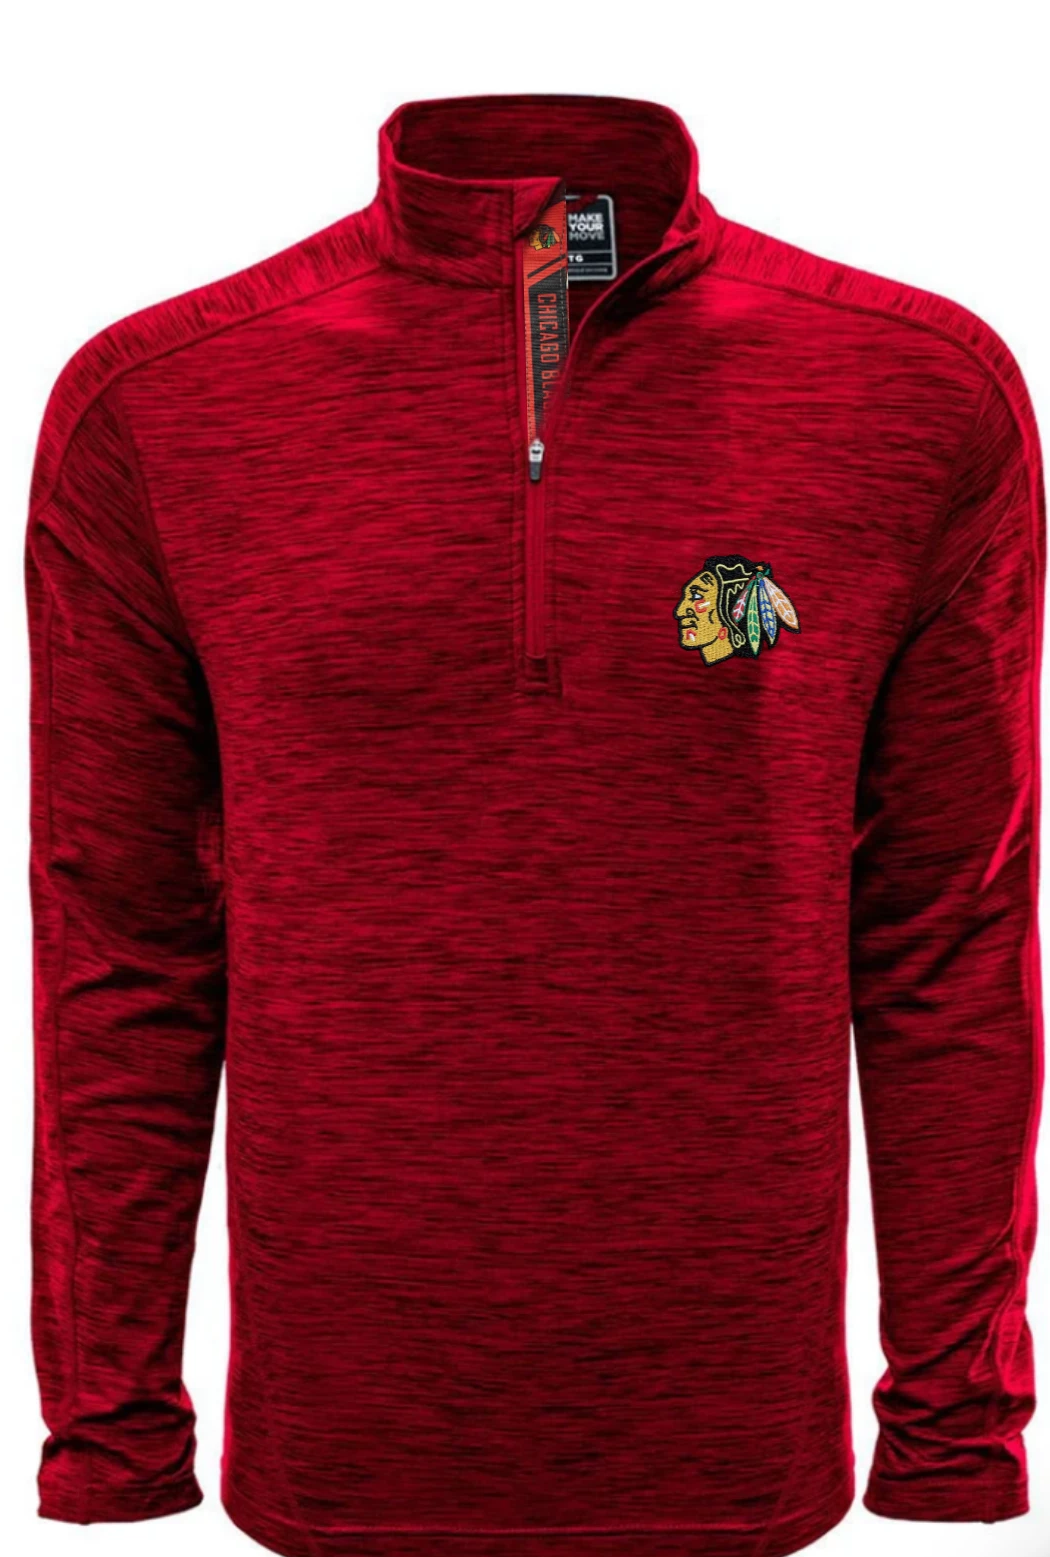 Men’s Chicago Blackhawks Red 1/4 Zip Armour Shear Text Pullover Jacket